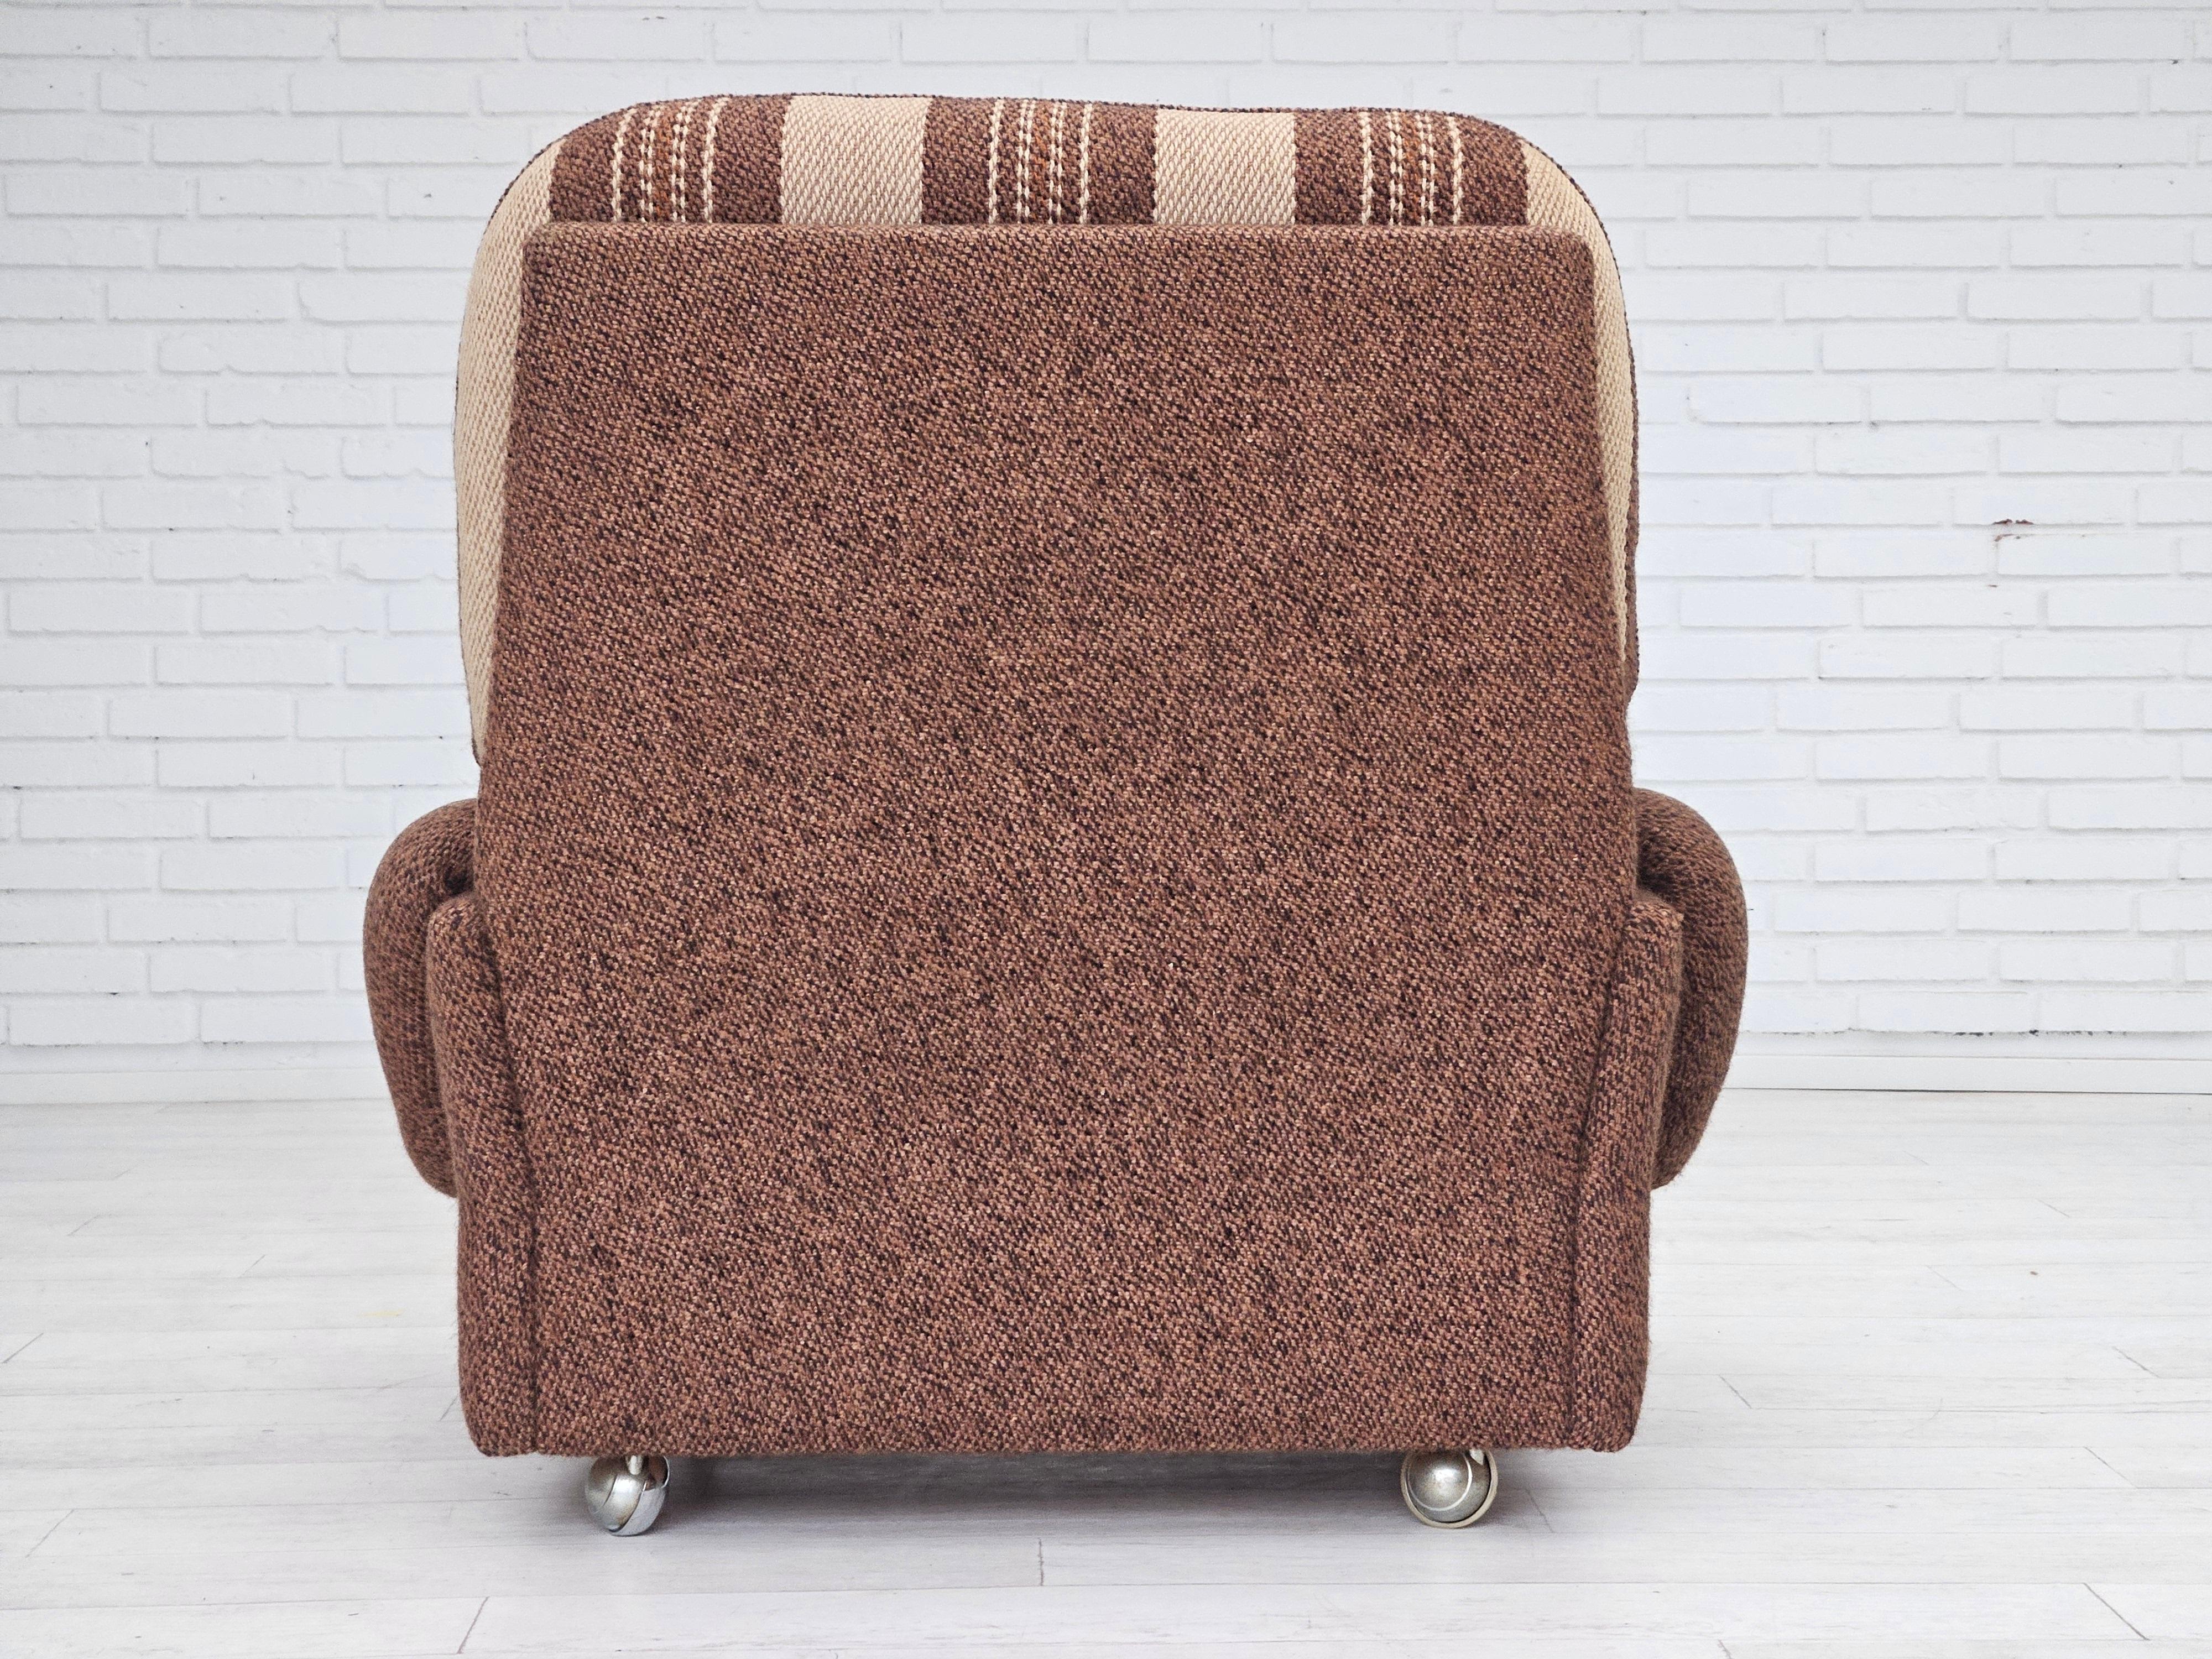 Fabric 1970s, Danish relax chair, original wool upholstery, very good condition. For Sale